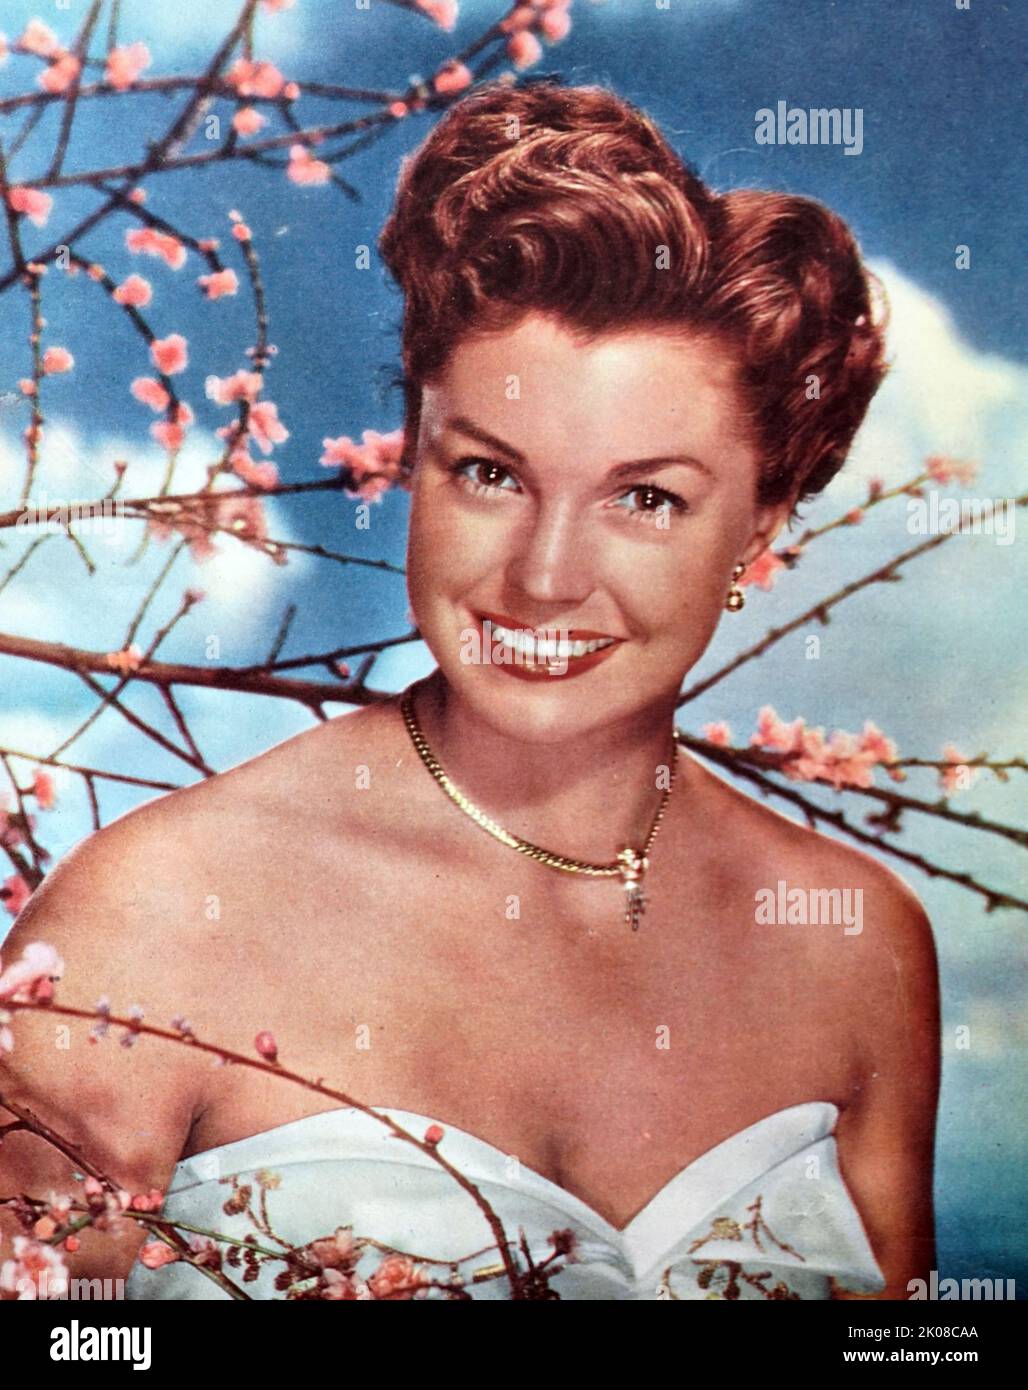 Esther Jane Williams (August 8, 1921 - June 6, 2013) was an American competitive swimmer and actress. She set regional and national records in her late teens on the Los Angeles Athletic Club swim team. Unable to compete in the 1940 Summer Olympics because of the outbreak of World War II, she spent five months swimming alongside Olympic gold-medal winner and Tarzan star Johnny Weissmuller at Billy Rose's Aquacade, and caught the attention of Metro-Goldwyn-Mayer scouts. Williams made a series of films in the 1940s and early 1950s known as 'aquamusicals', which featured elaborate performances wit Stock Photo